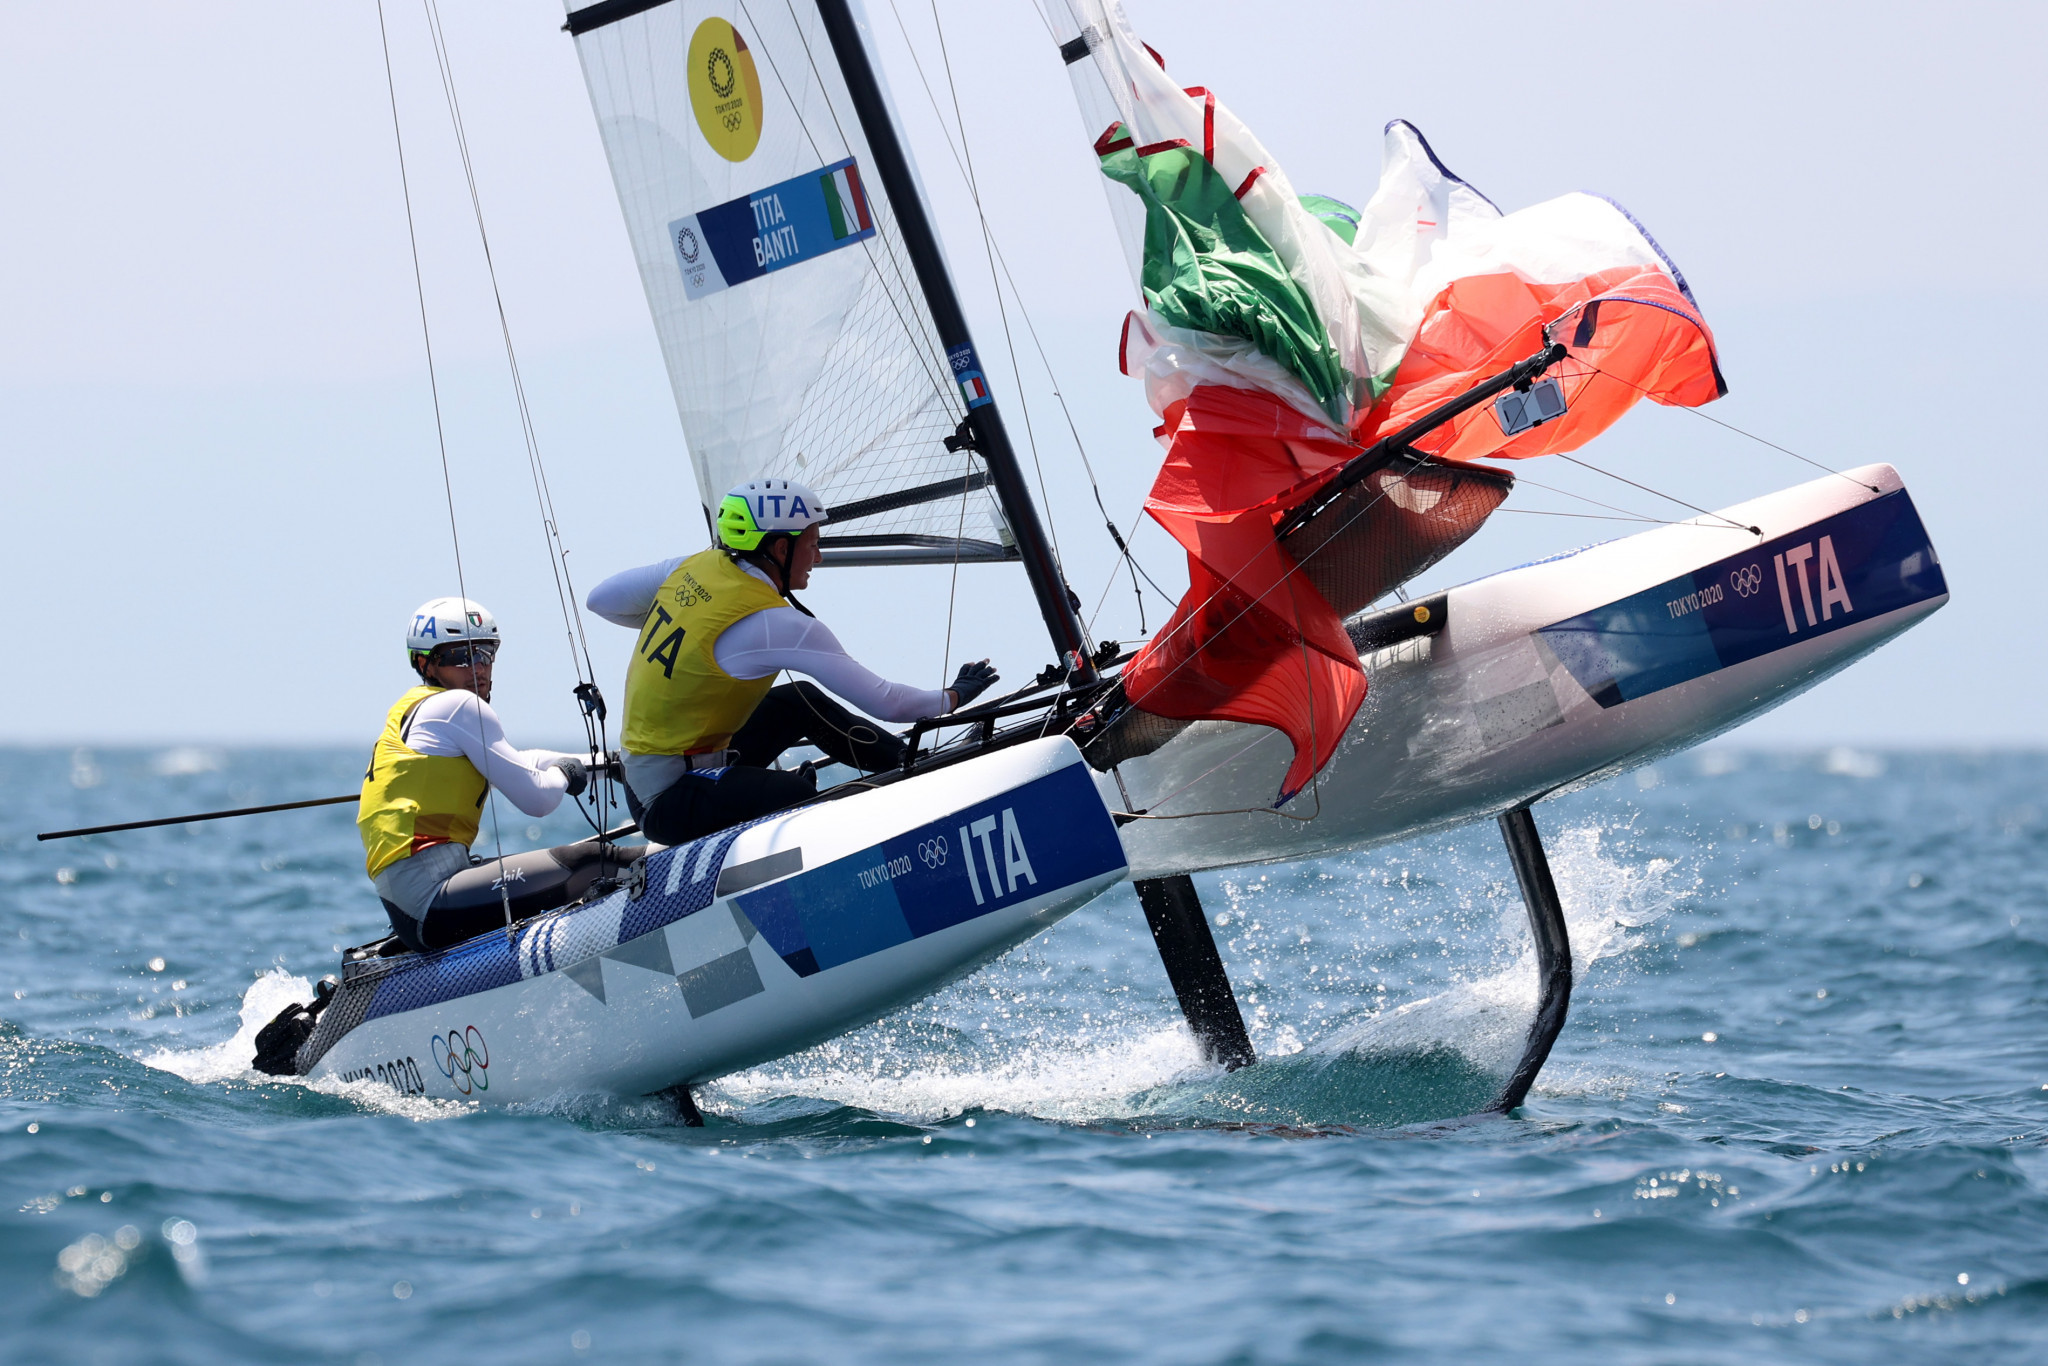 Ruggero Tita and Caterina Banti are proving to be a force to be reckoned with at the Nacra17 World Championships ©Getty Images